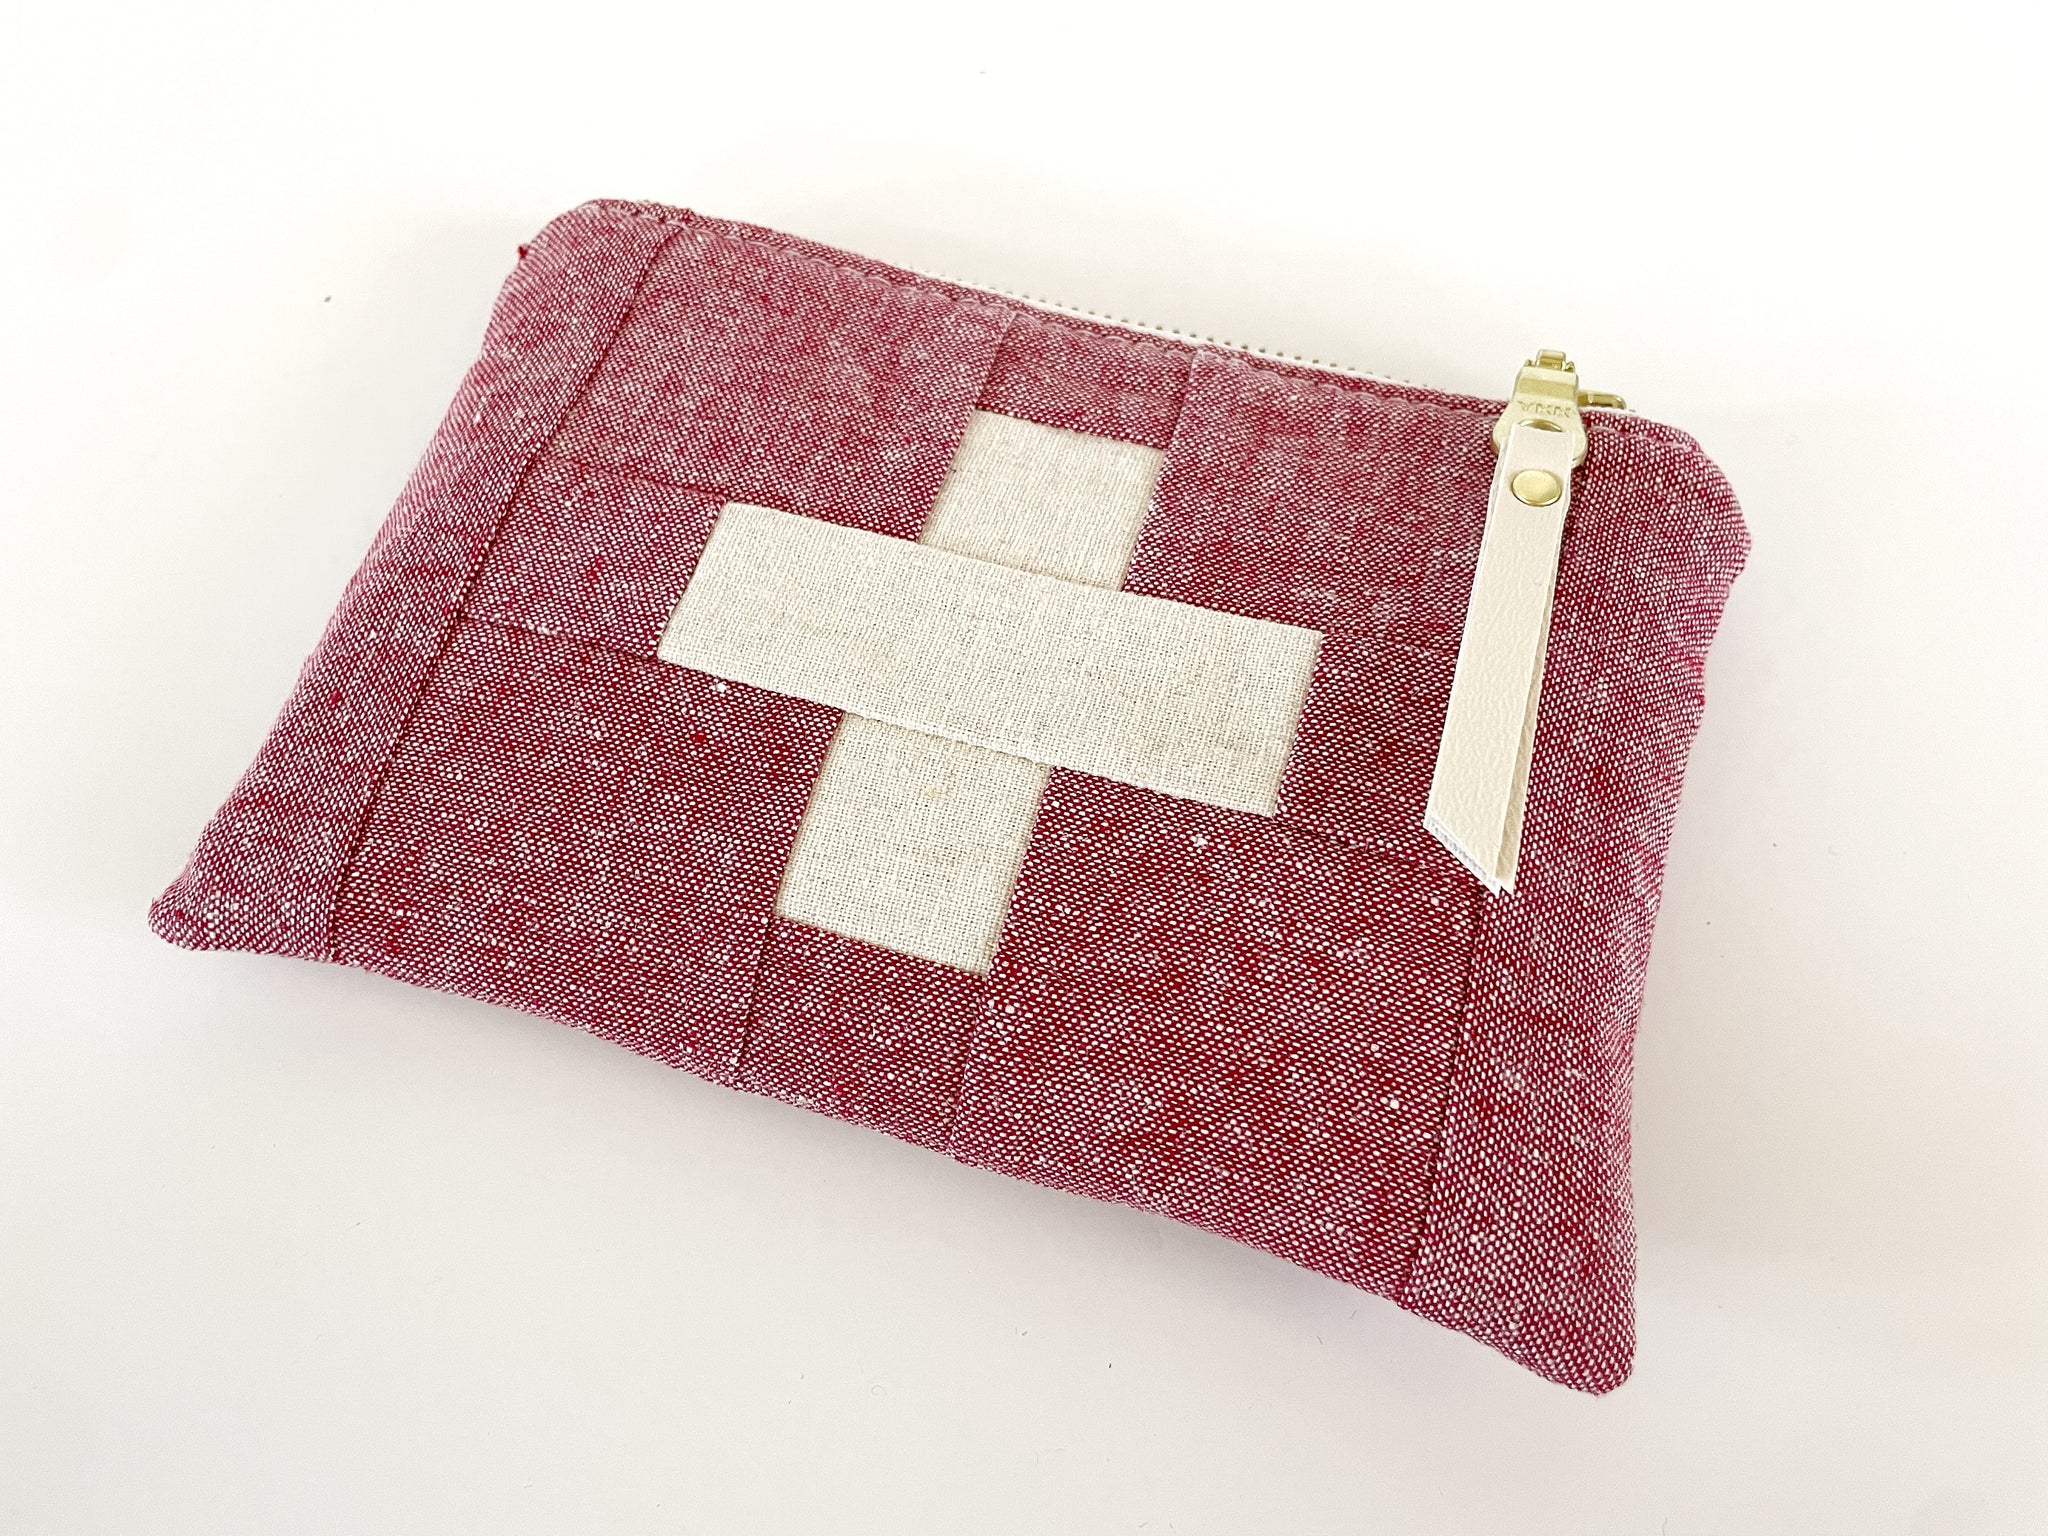 Linen First Aid Bag | Red and Ivory